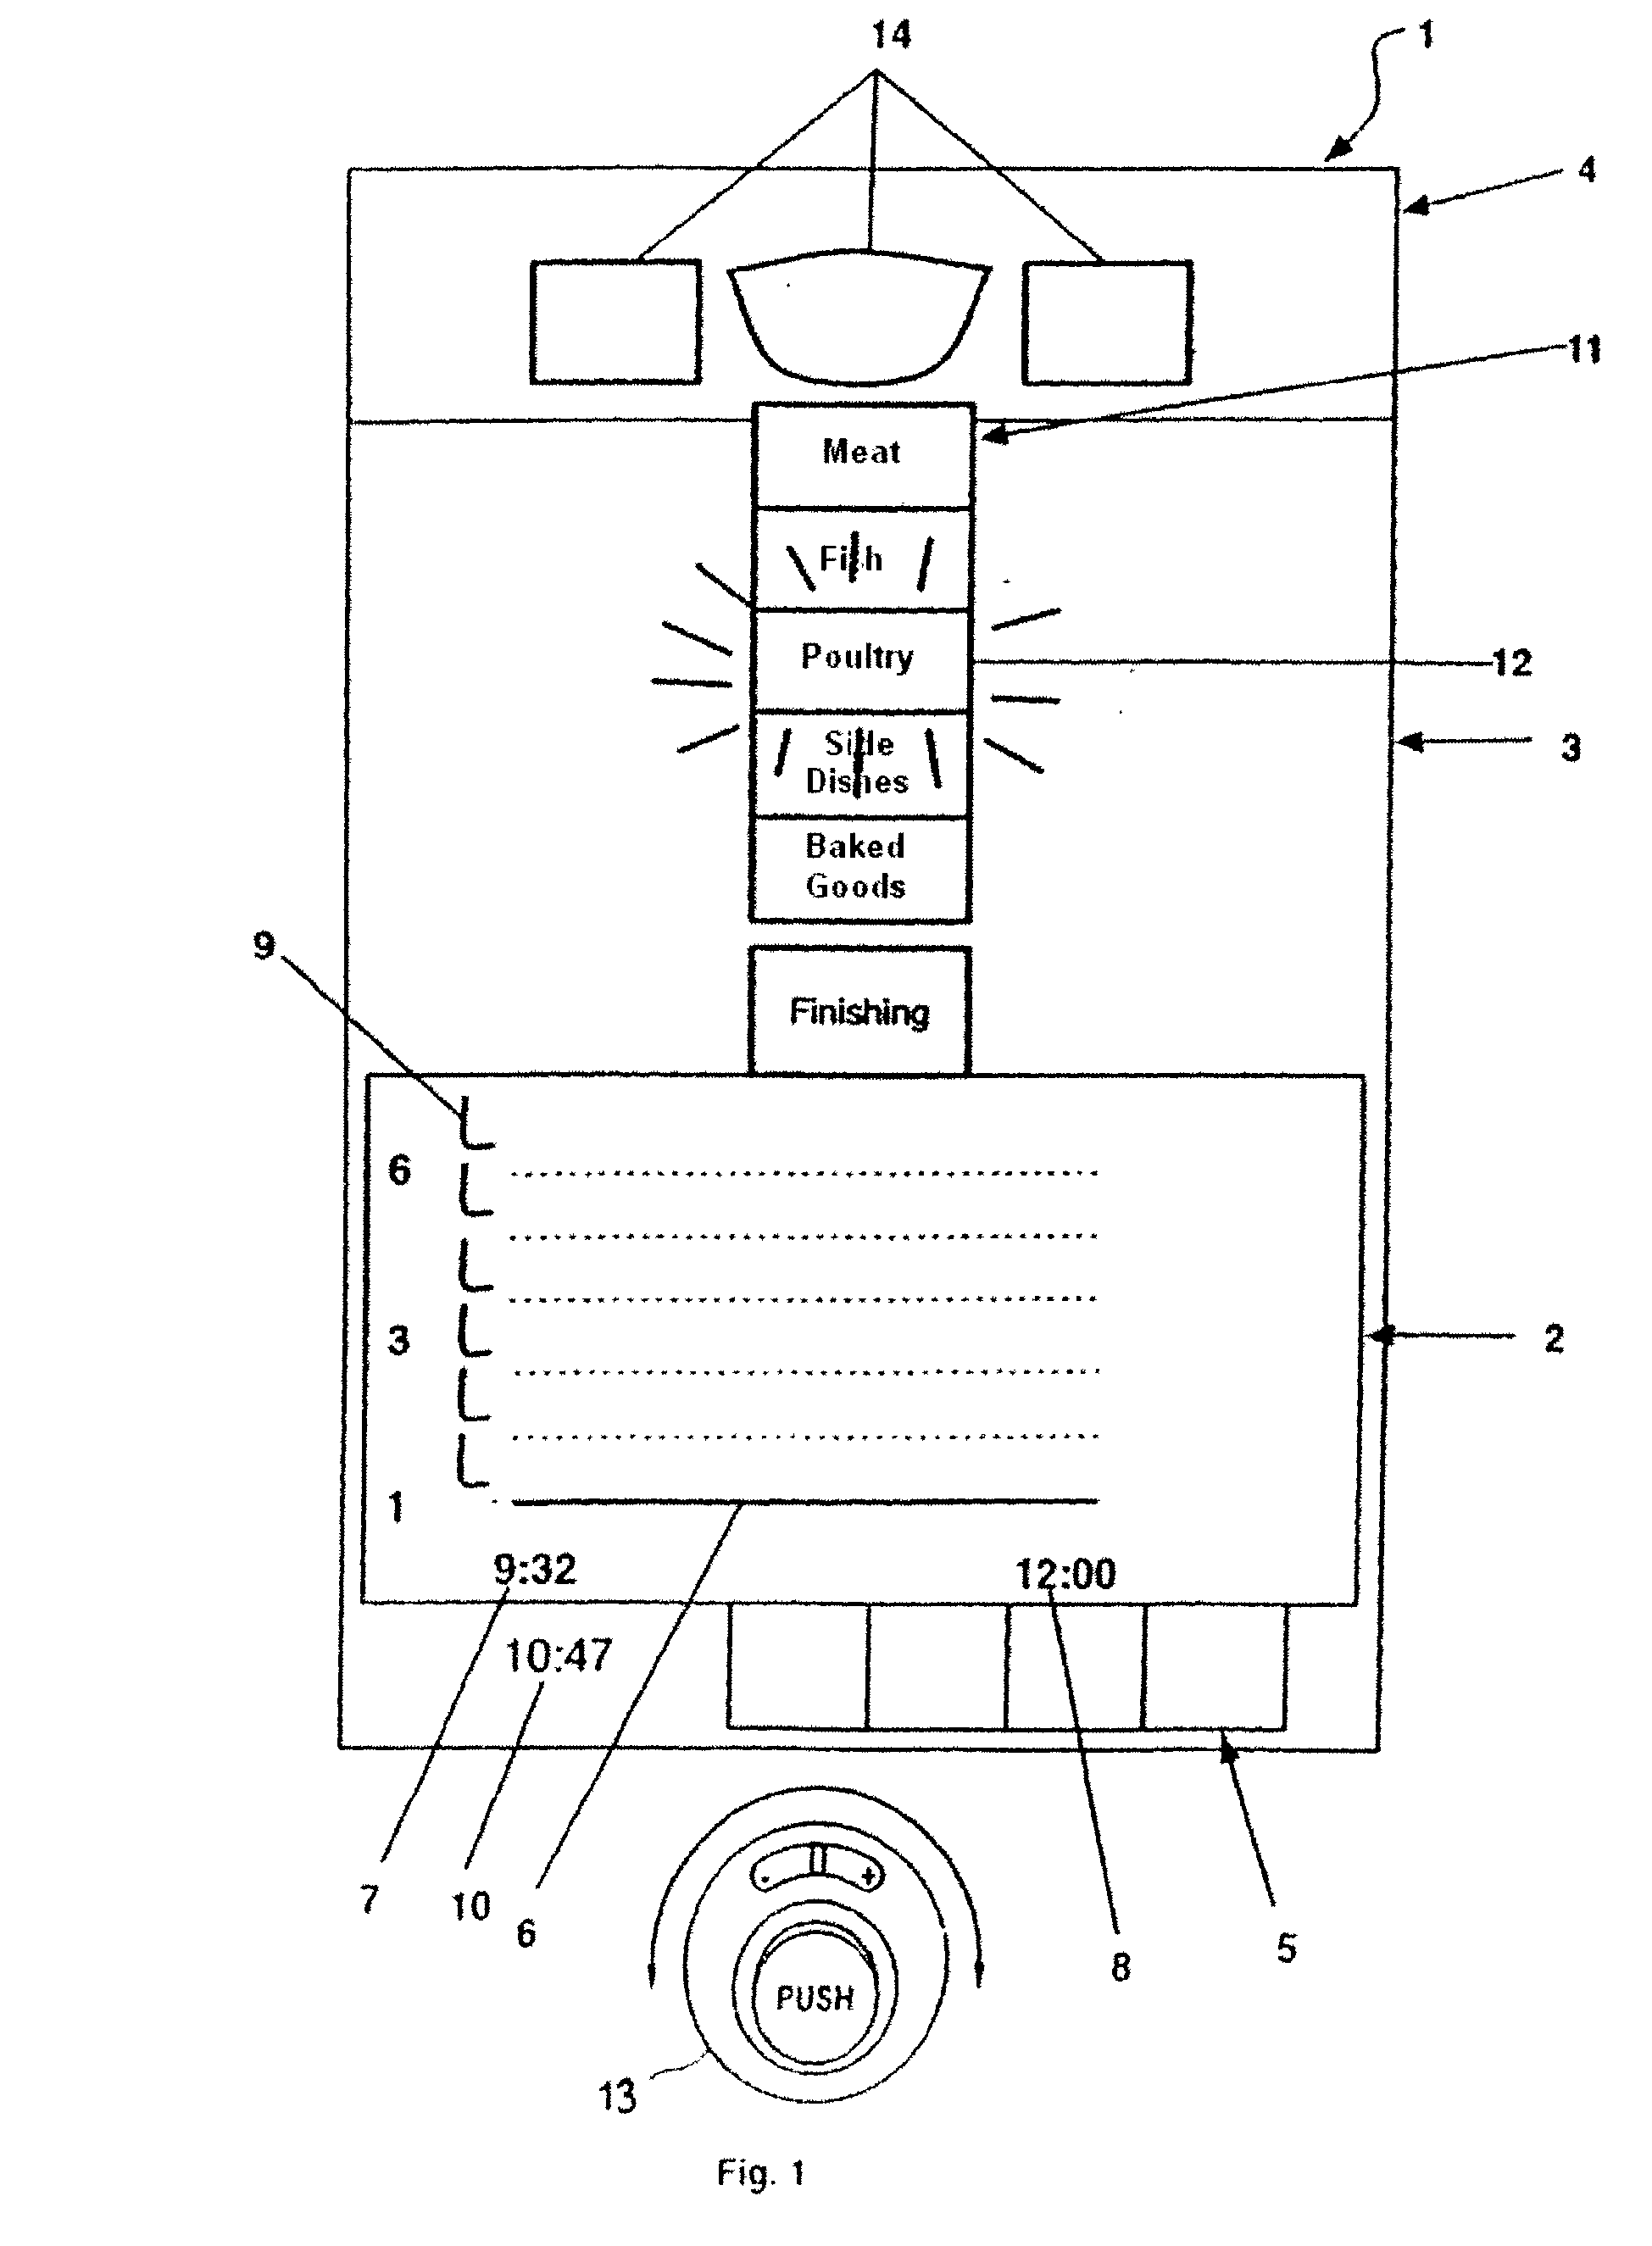 Method for selecting and arranging program representatives and a cooking device therefor